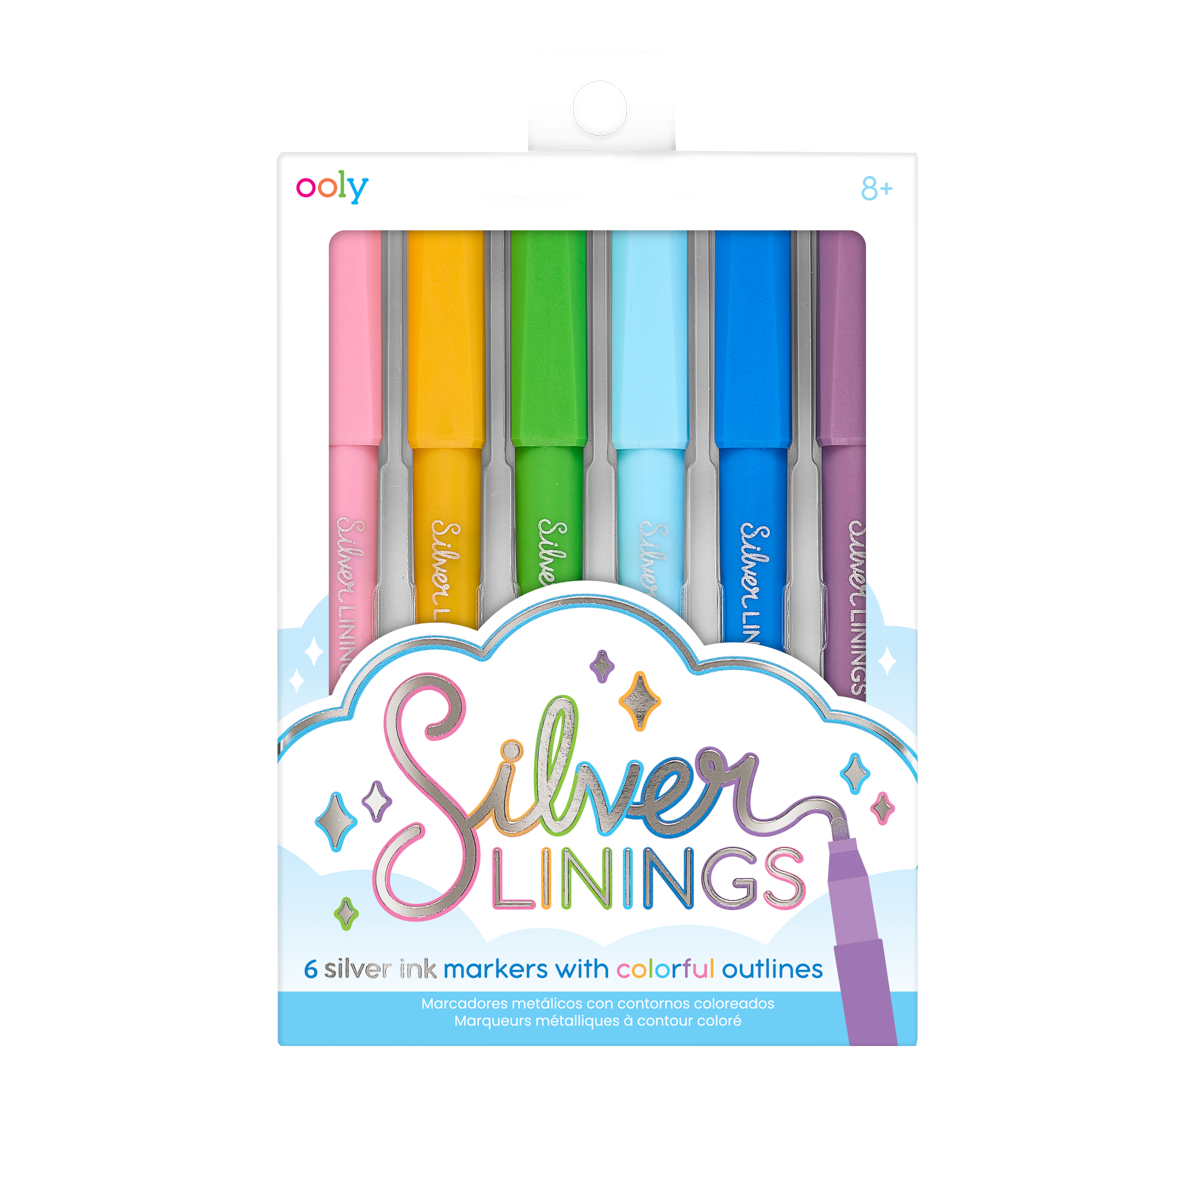 OOLY Silver Linings Outline Marker in packaging